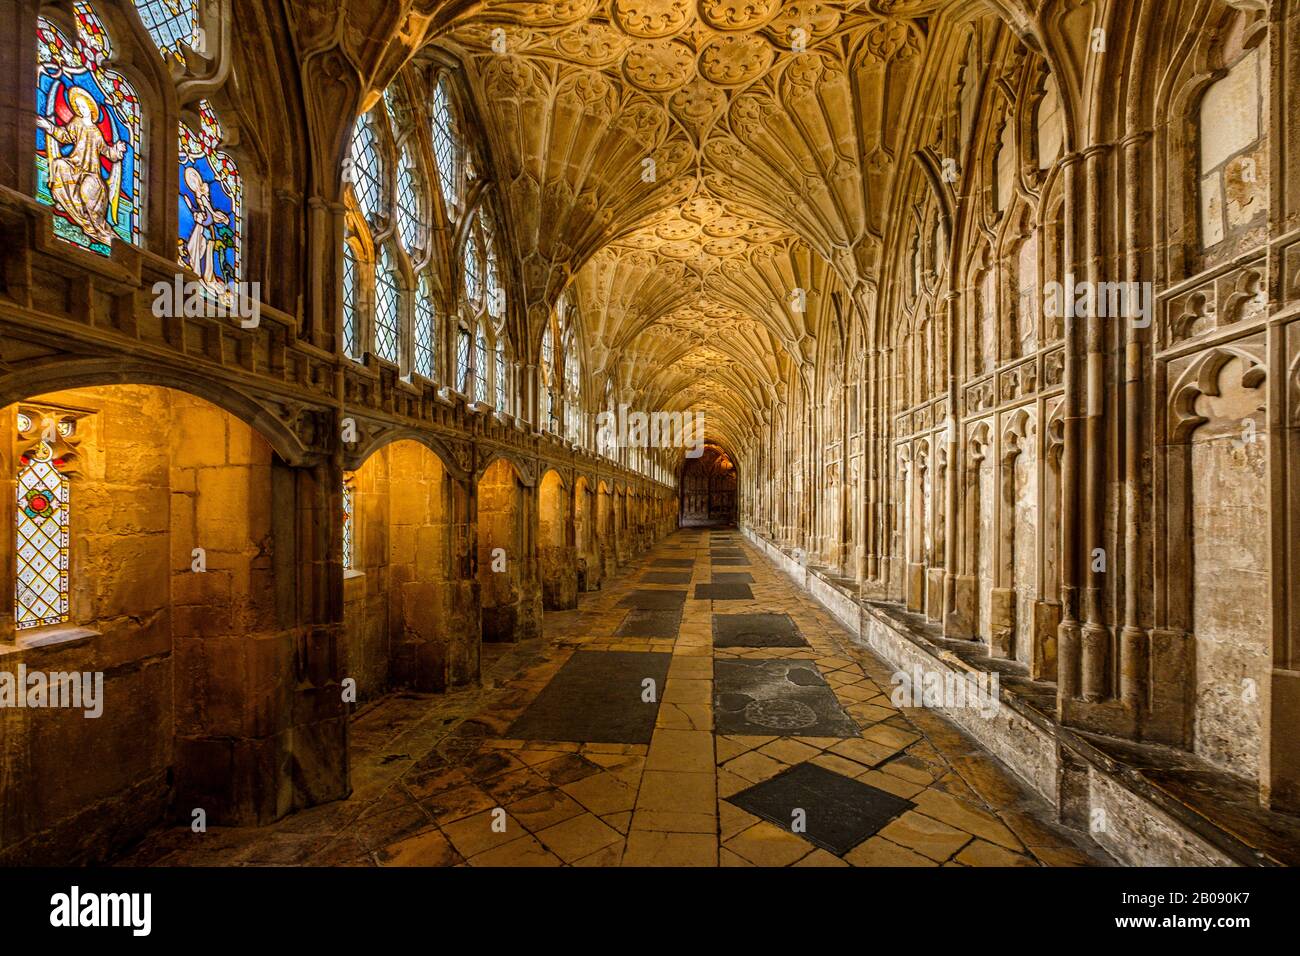 Gloucester Cathedral Cloisters have wonderful fan vaulted ceilings dating from the 14th Century. Stock Photo